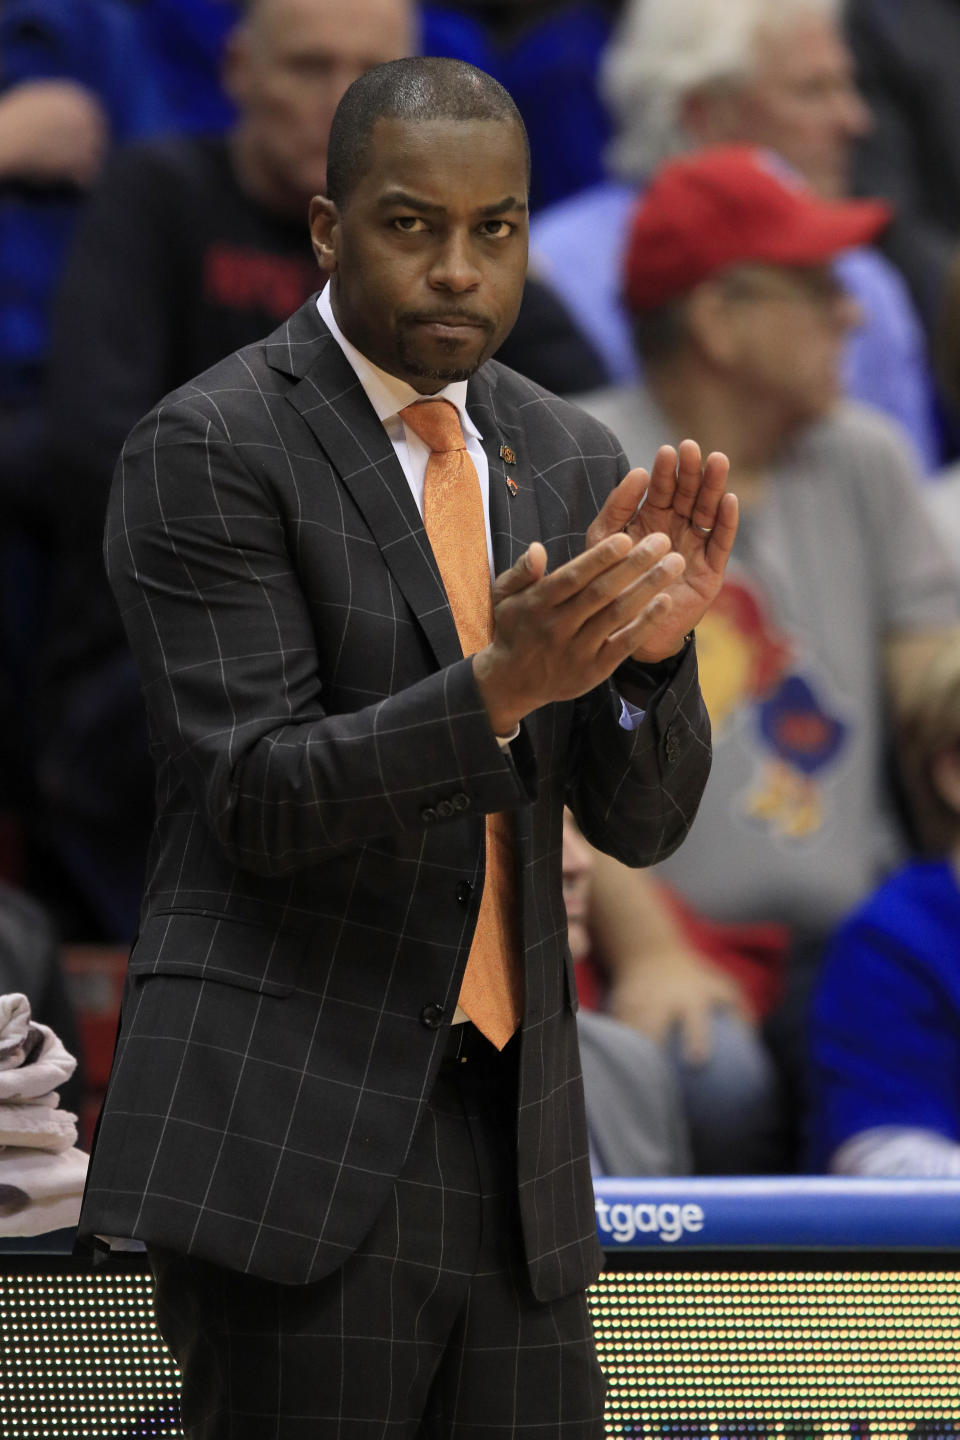 Oklahoma State head coach Mike Boynton applauds his team during the first half of an NCAA college basketball game against Kansas in Lawrence, Kan., Monday, Feb. 24, 2020. (AP Photo/Orlin Wagner)